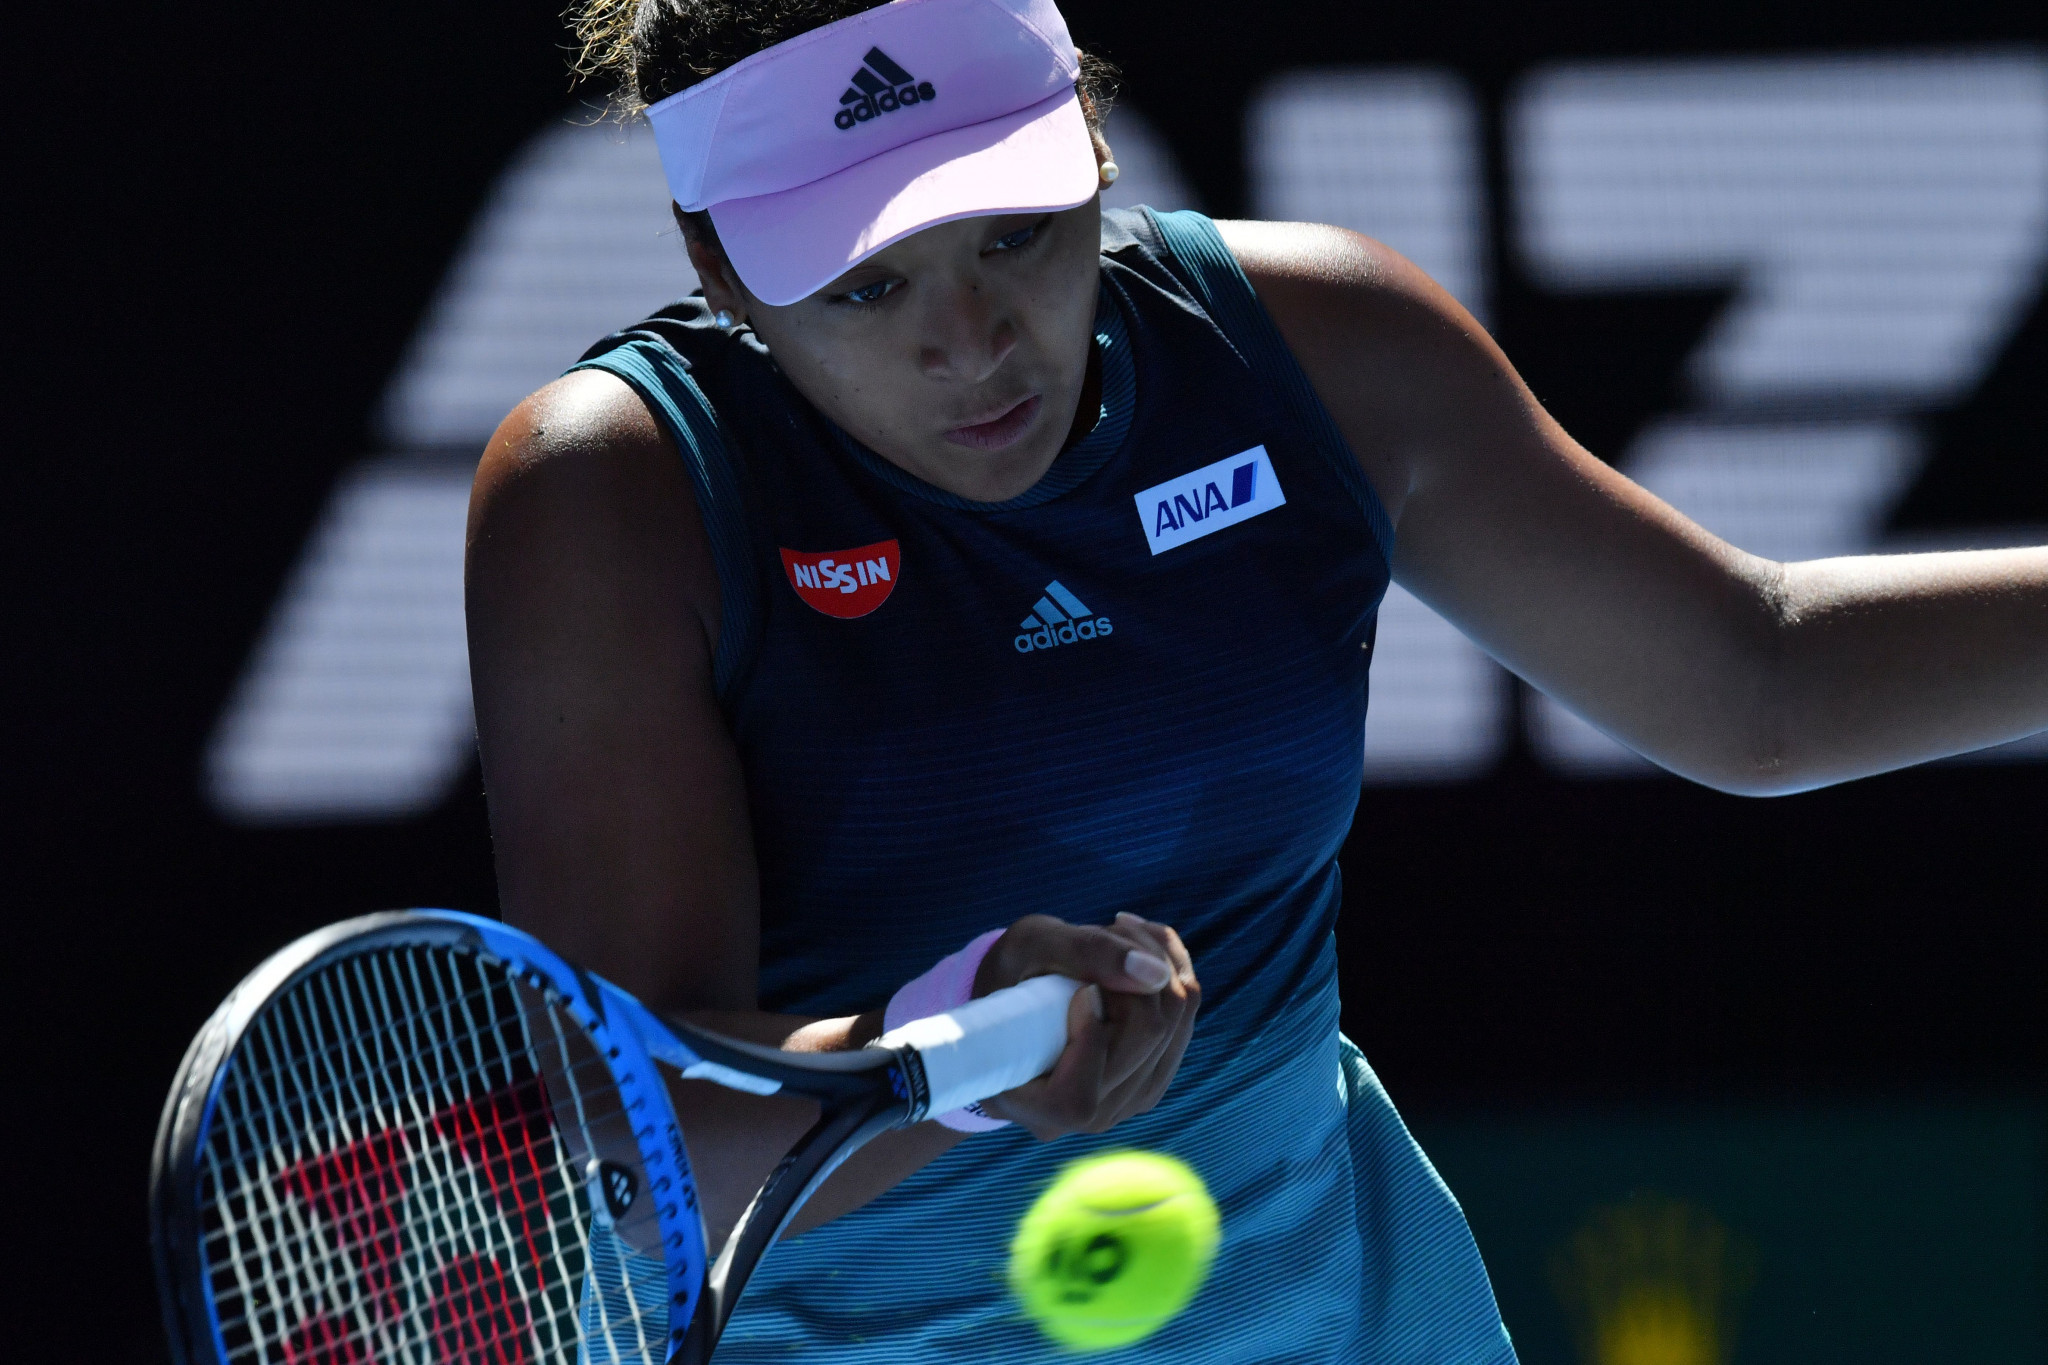 Naomi Osaka of Japan will take on the Czech player in the semi-finals after she beat Elina Svitolina of Ukraine ©Getty Images